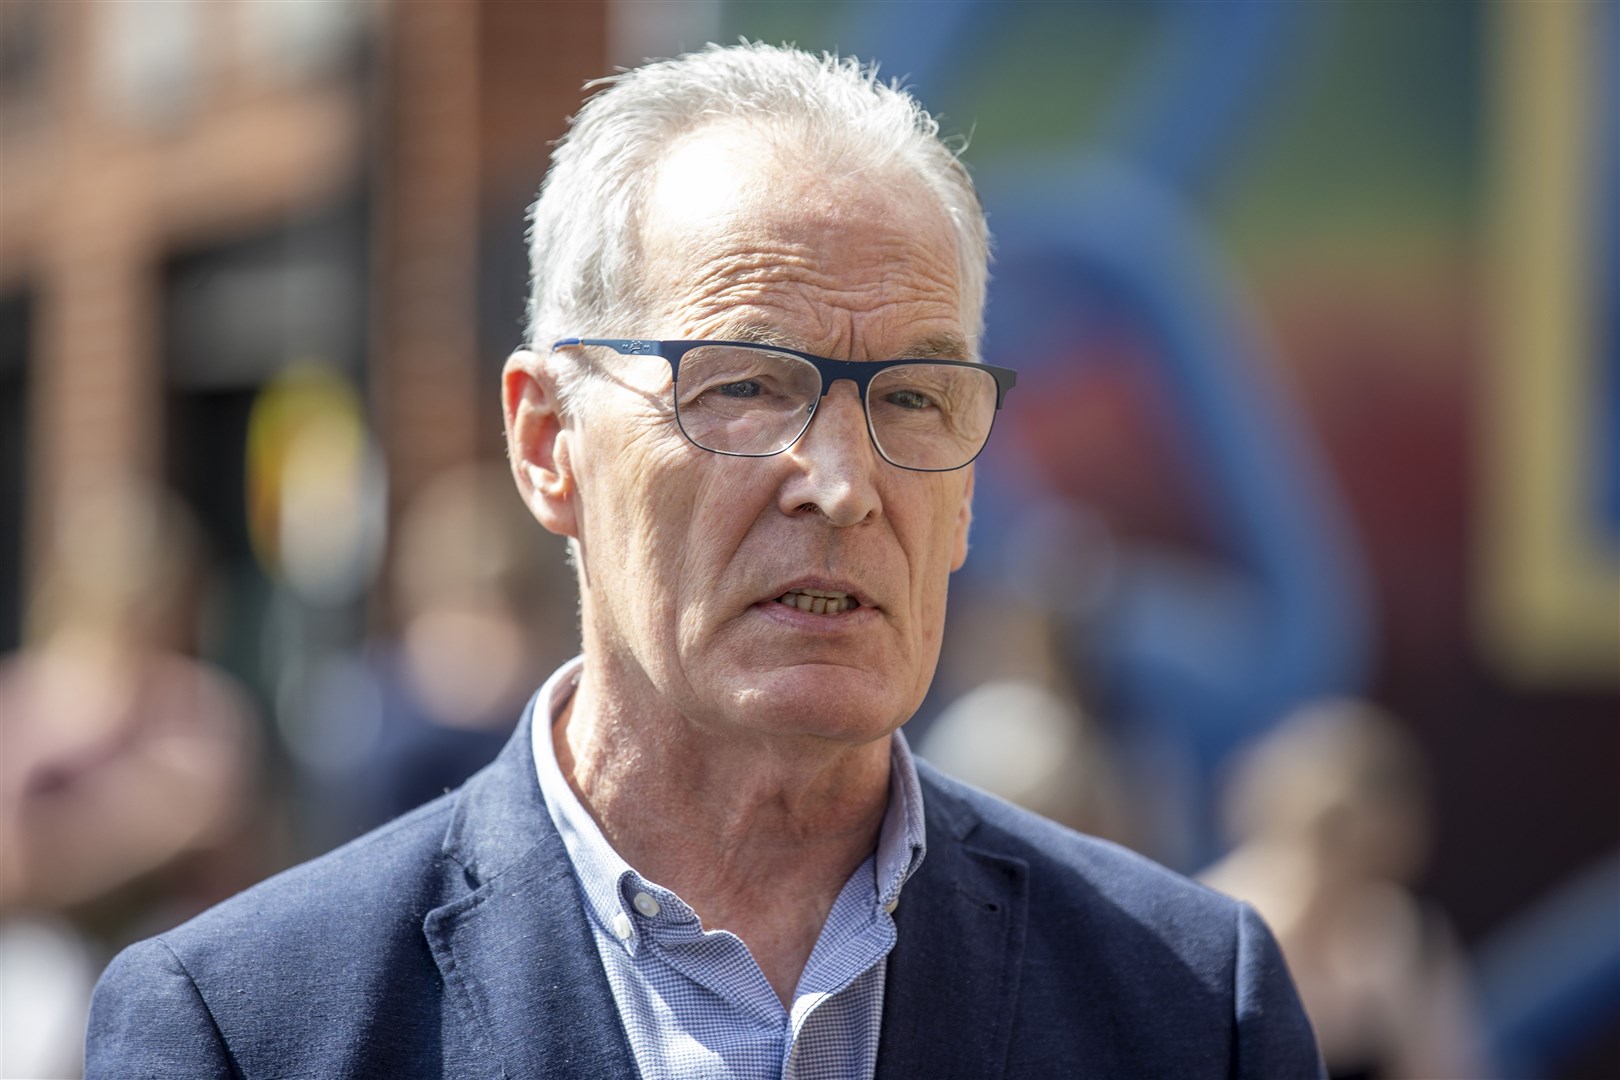 Sinn Fein MLA Gerry Kelly has denied his party threatened to withdraw support for policing (Liam McBurney/PA).